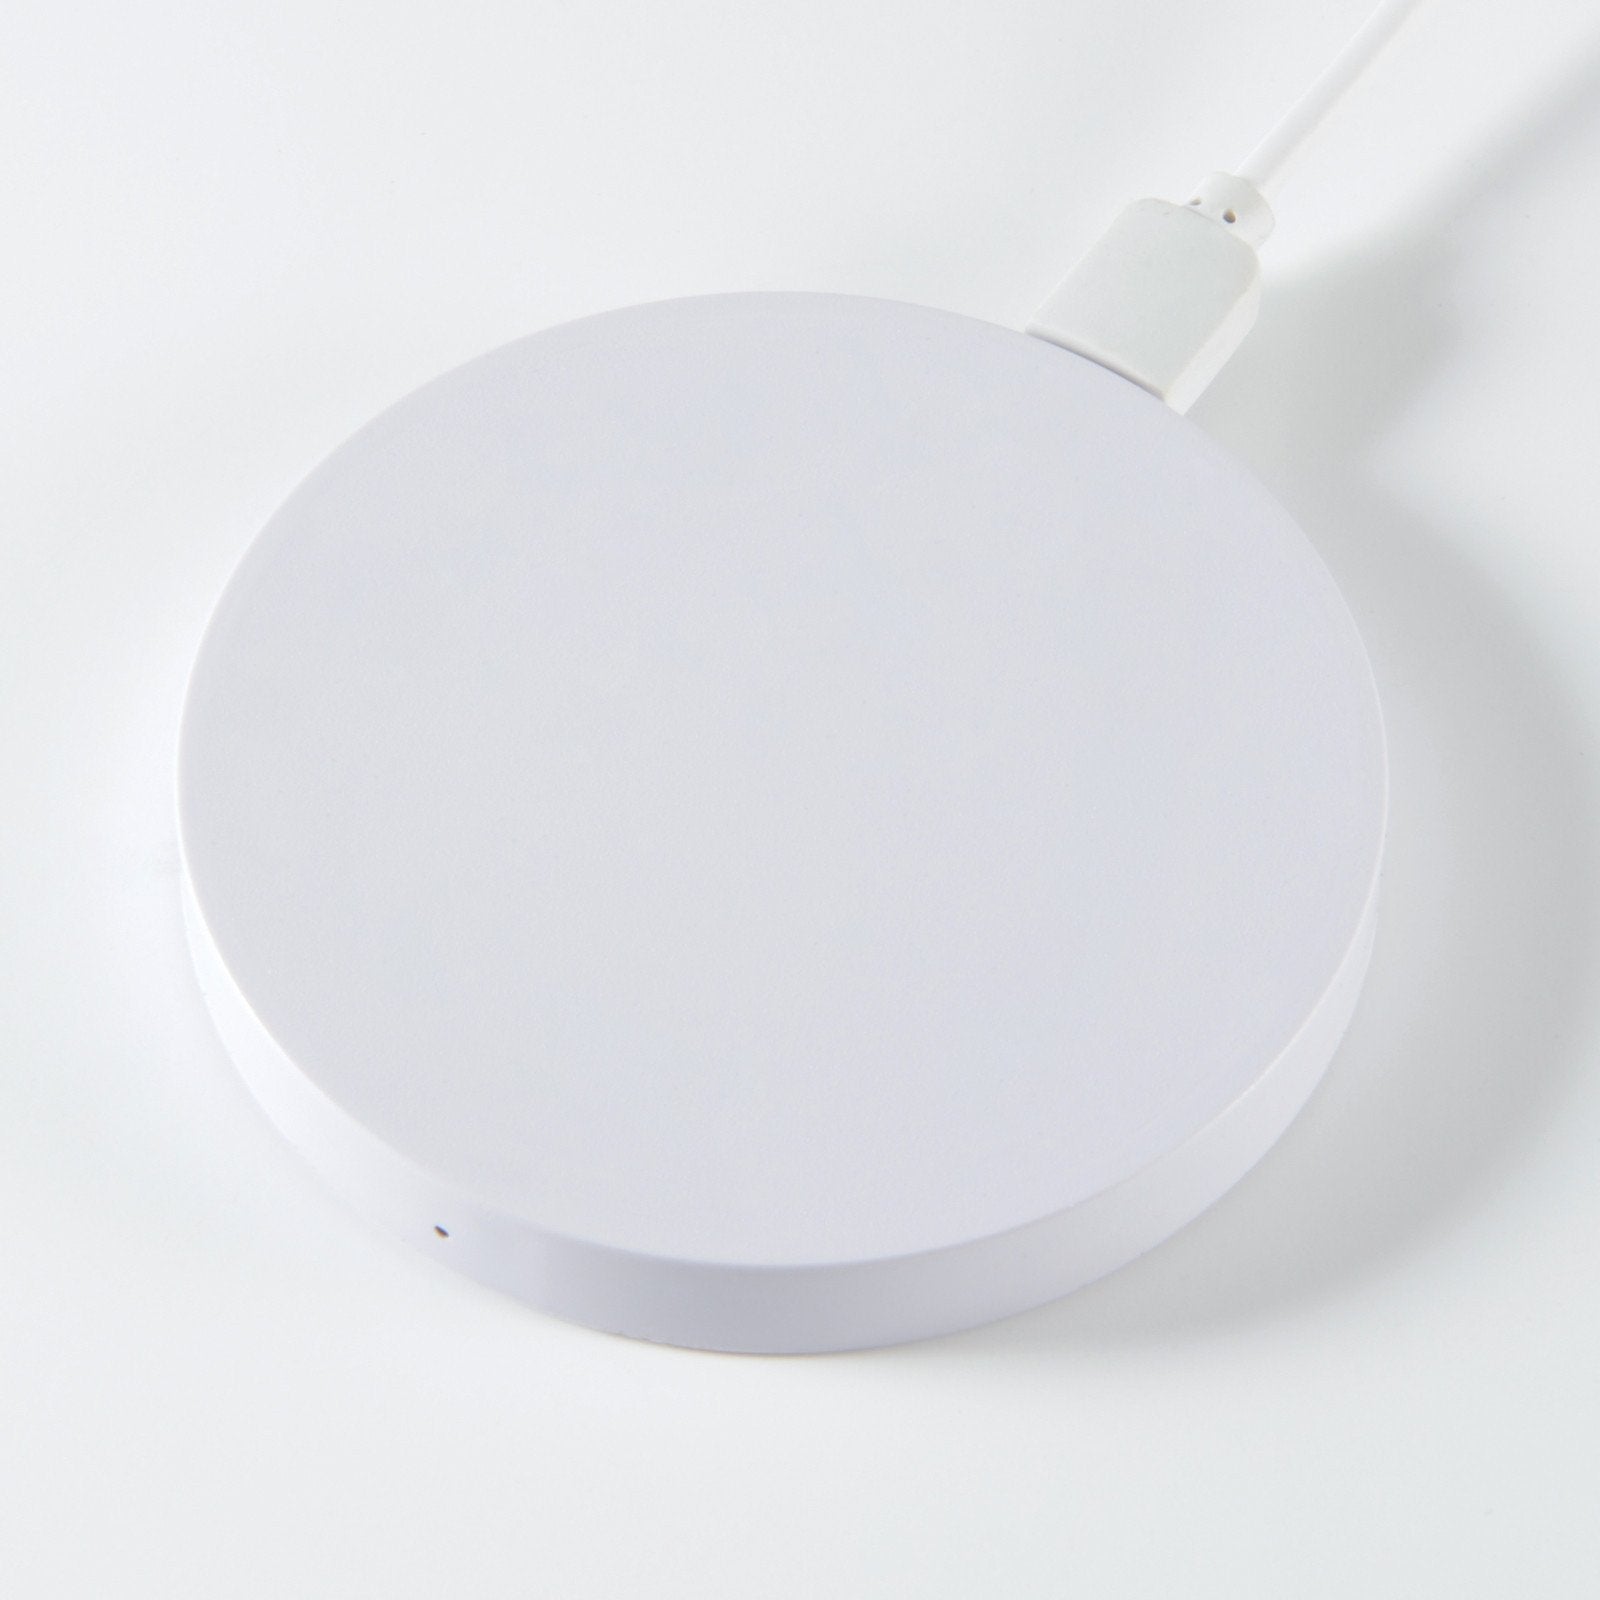 Arc Inductive Wireless Charger